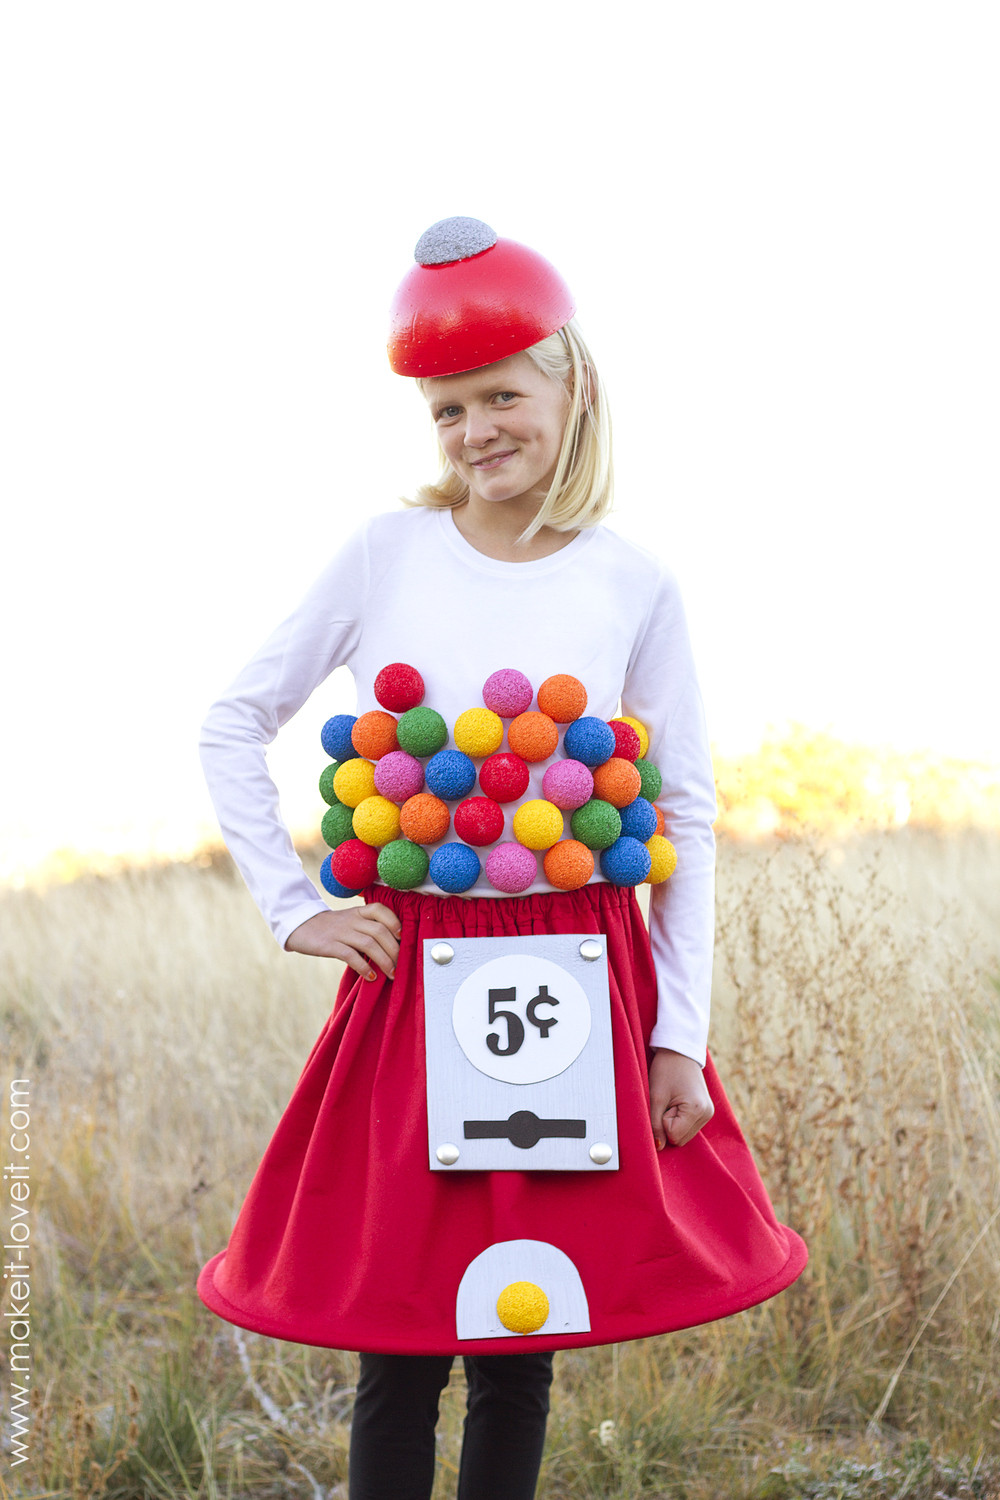 Halloween Costumes DIY
 36 SIMPLE COSTUME IDEAS for Kids and Adults